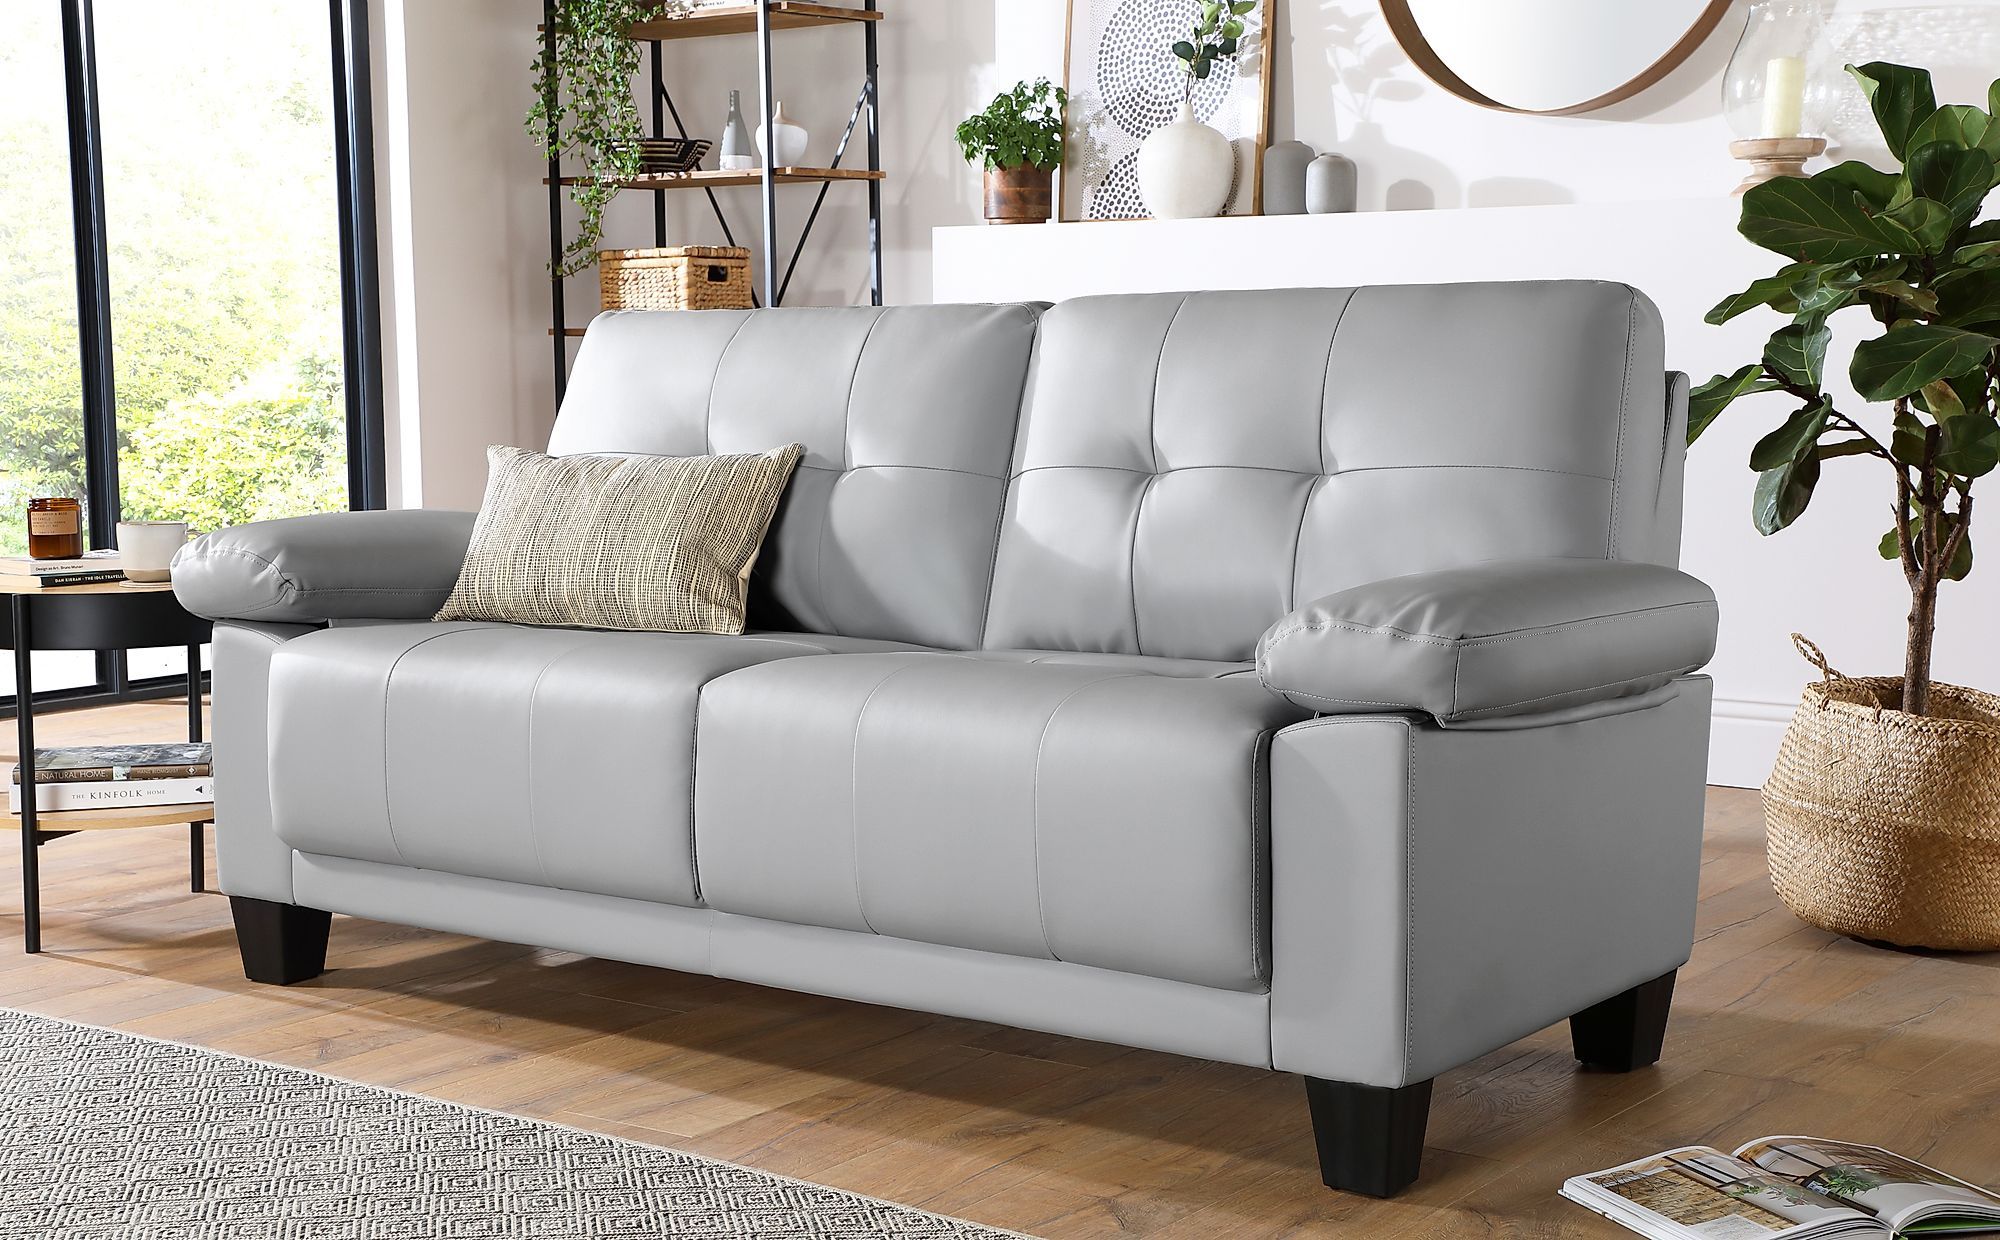 Linton Small Light Grey Leather 3 Seater Sofa | Furniture Choice Inside Sofas In Light Gray (View 16 of 22)